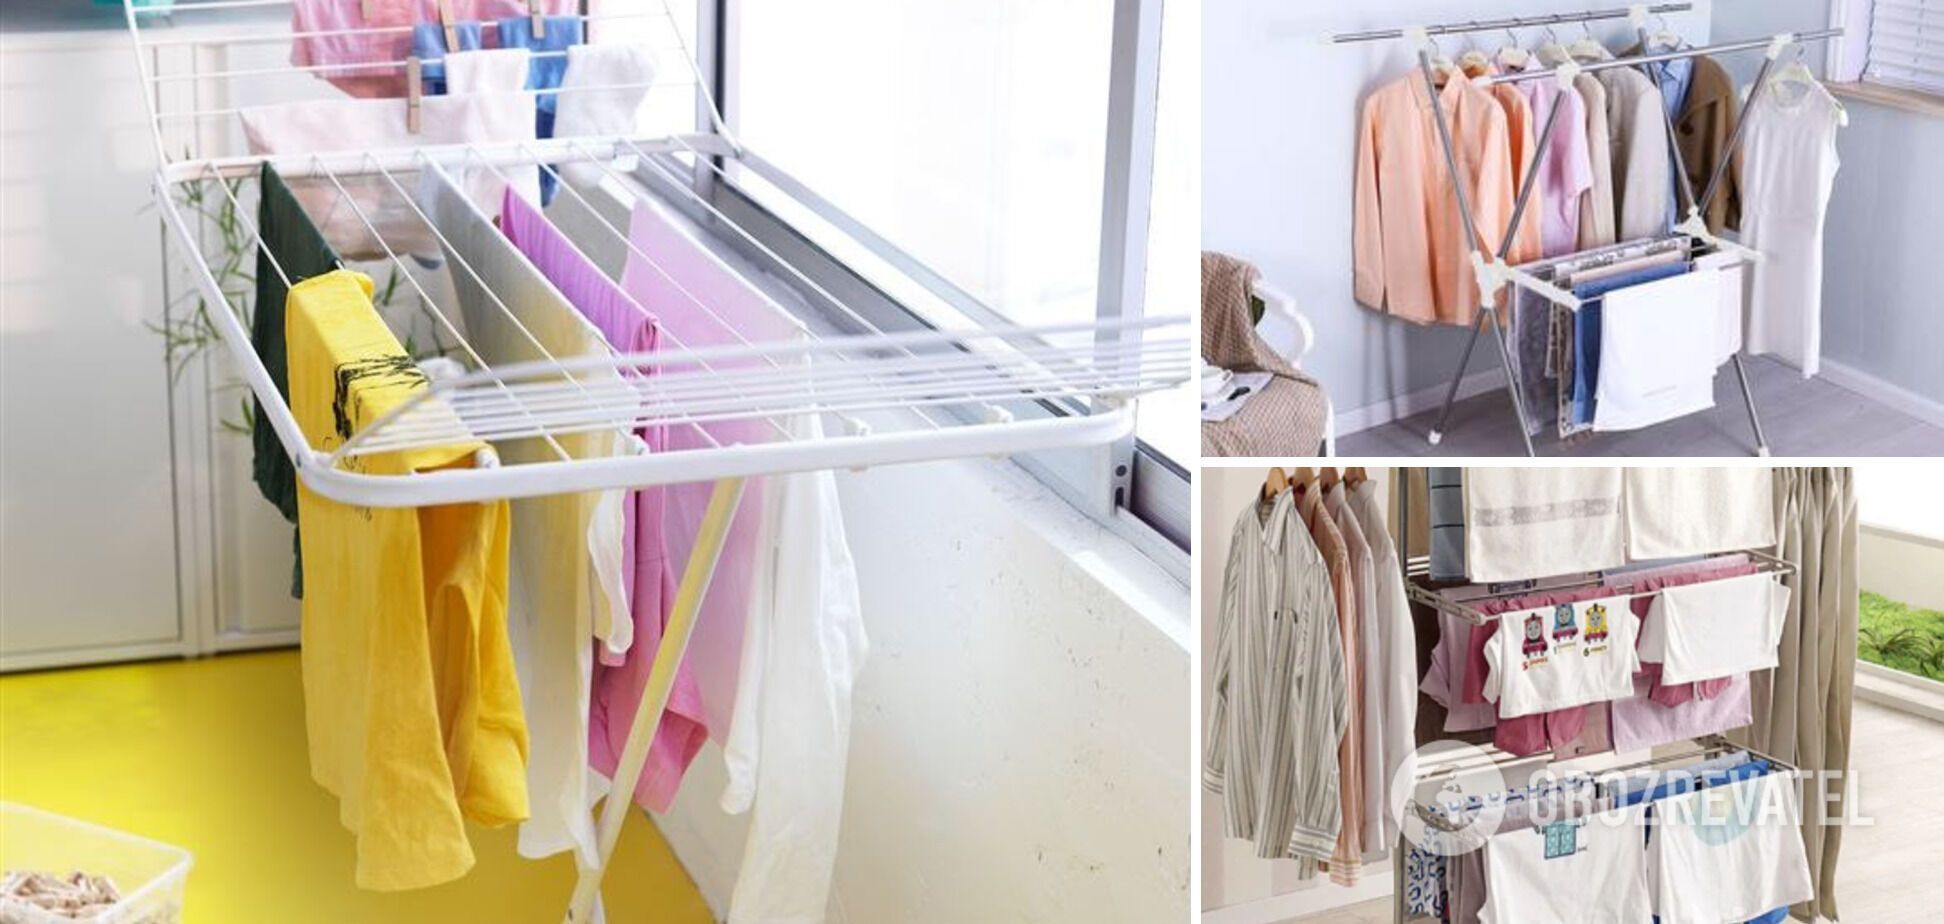 Laundry will dry twice as fast: a simple lifehack